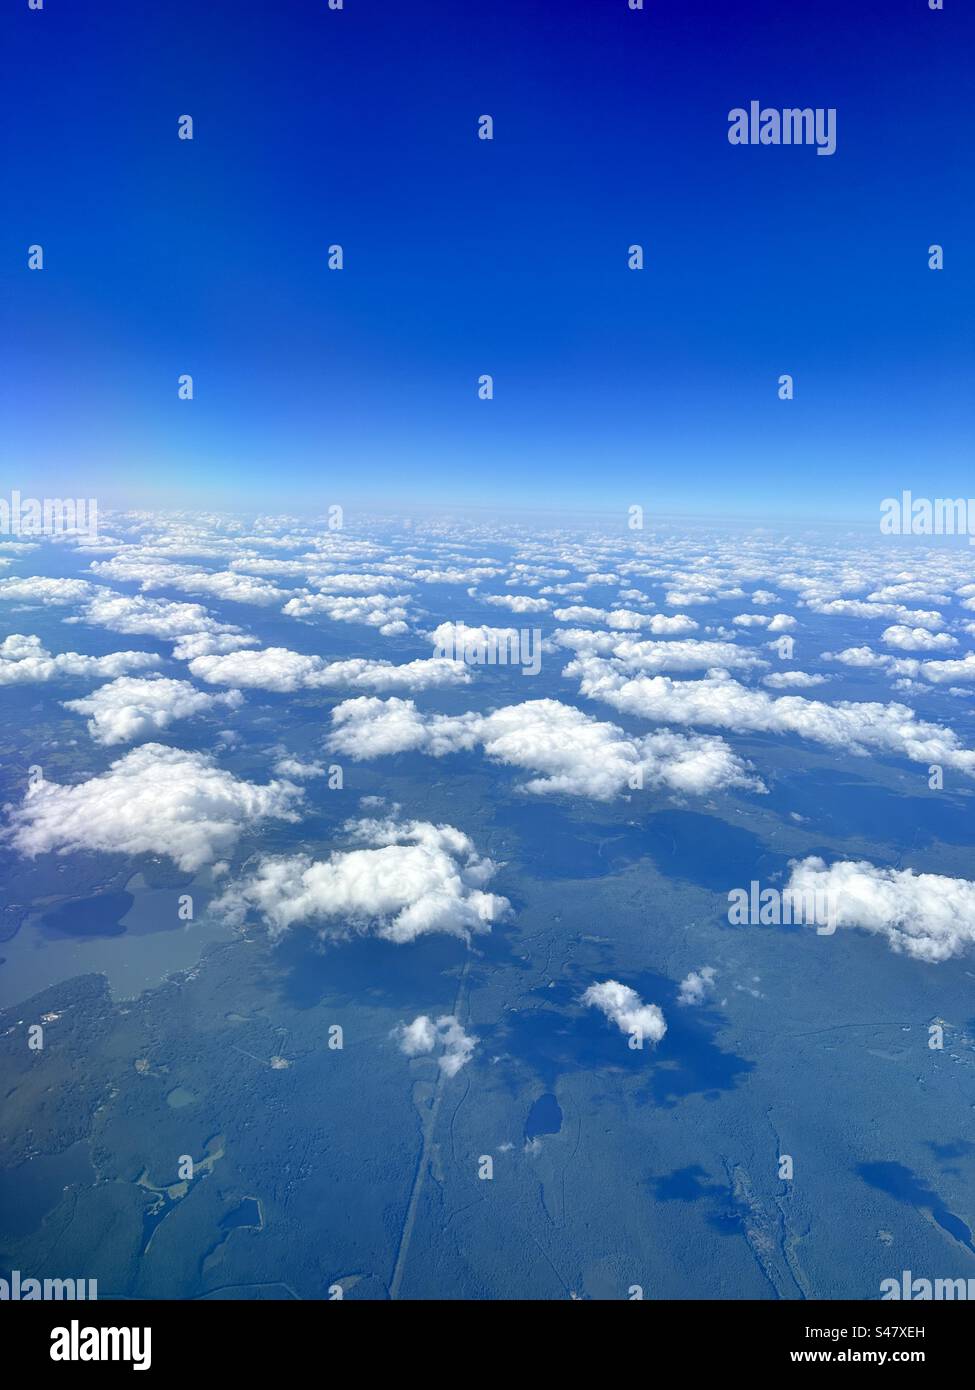 Airplane view over clouds Stock Photo